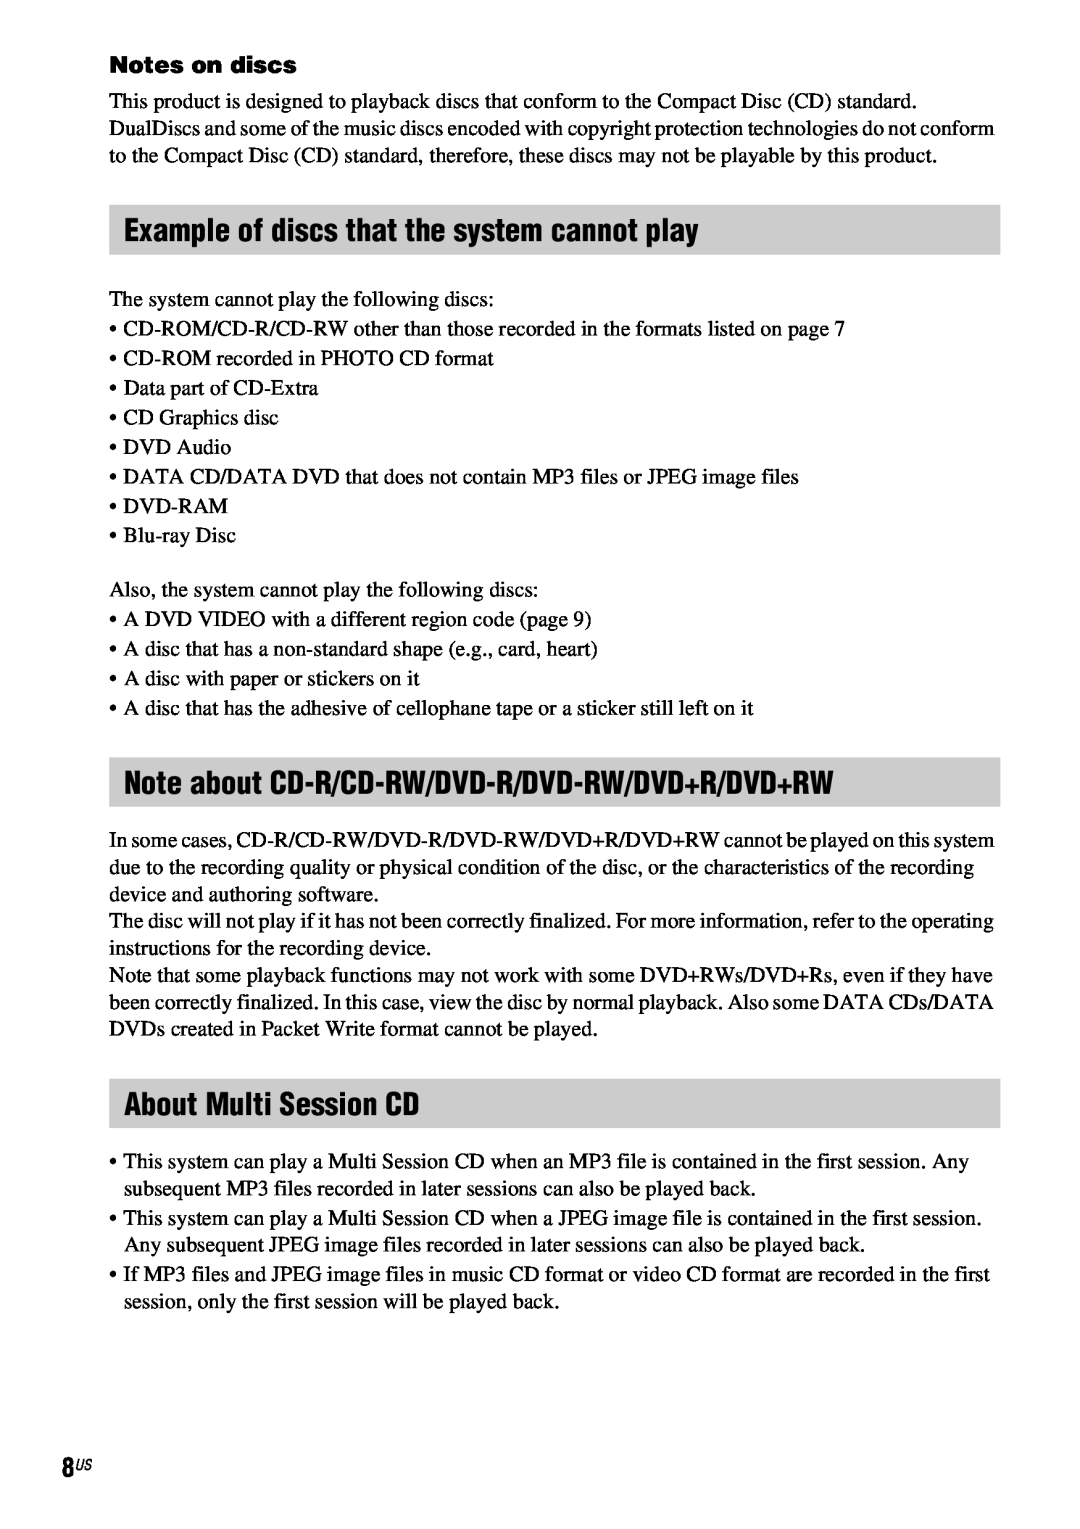 Sony DAV-HDX686W manual Example of discs that the system cannot play, Note about CD-R/CD-RW/DVD-R/DVD-RW/DVD+R/DVD+RW 